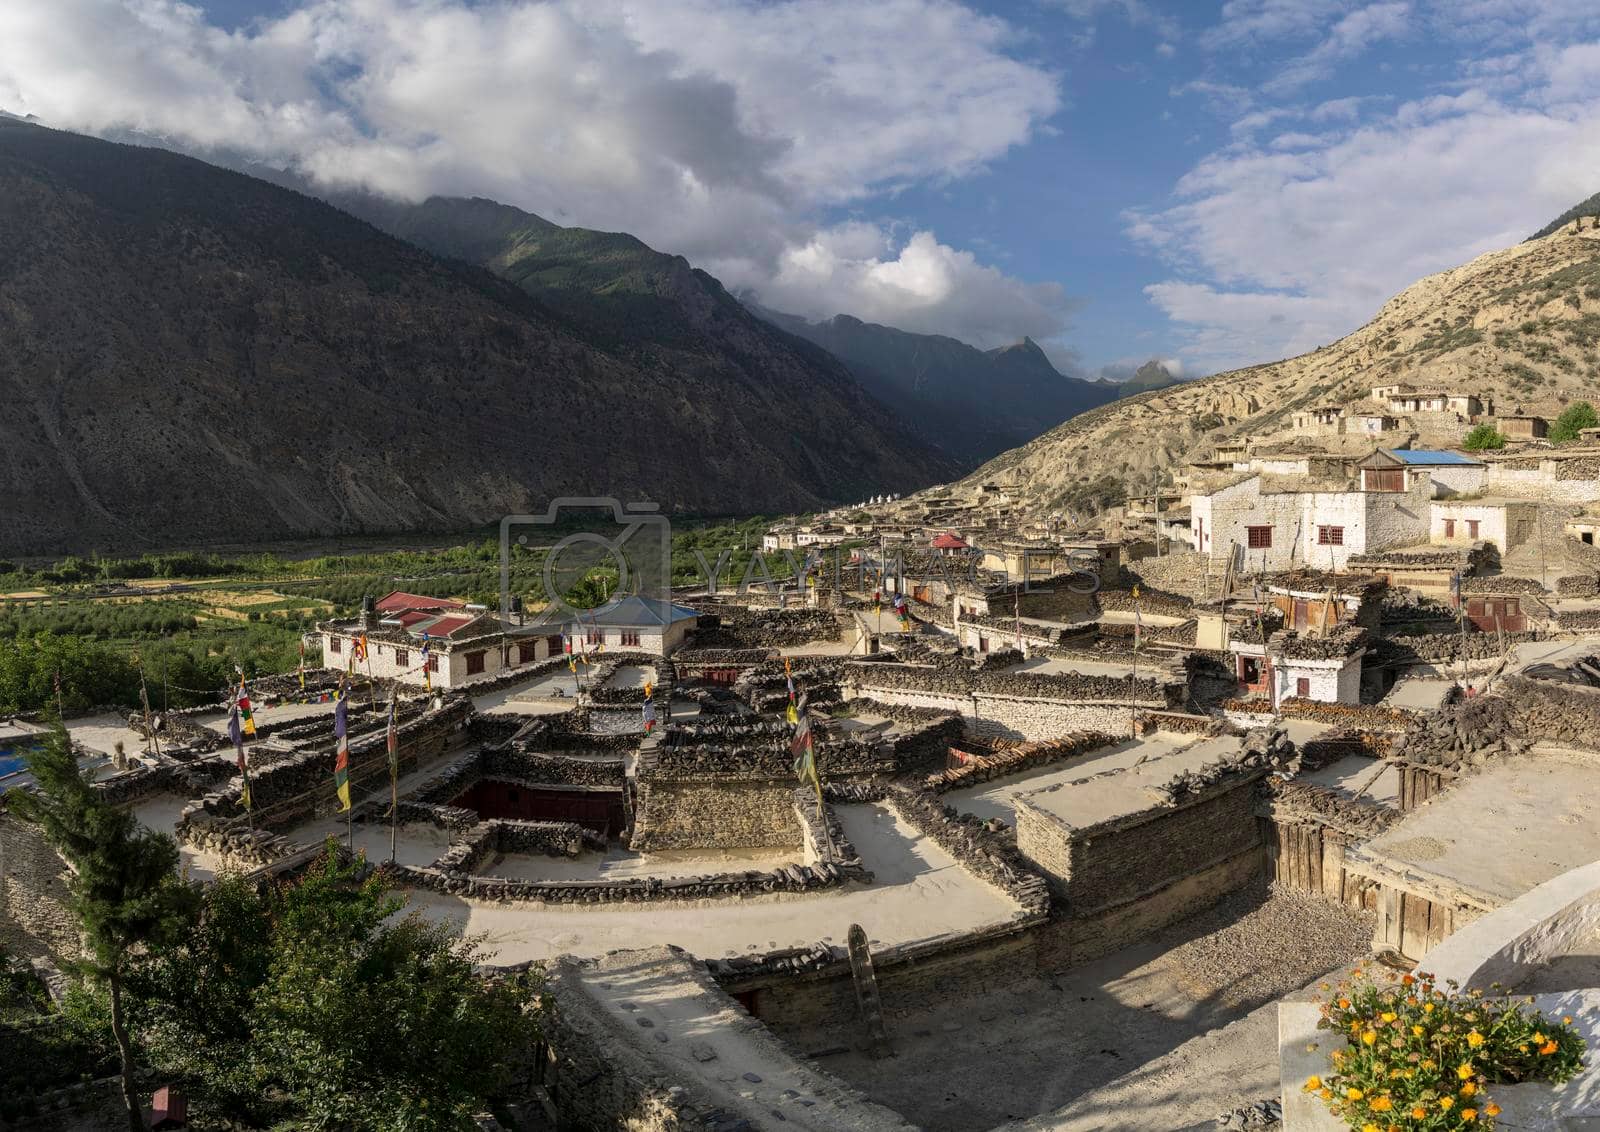 Royalty free image of Marpha village and apple gardens in Nepal by Arsgera